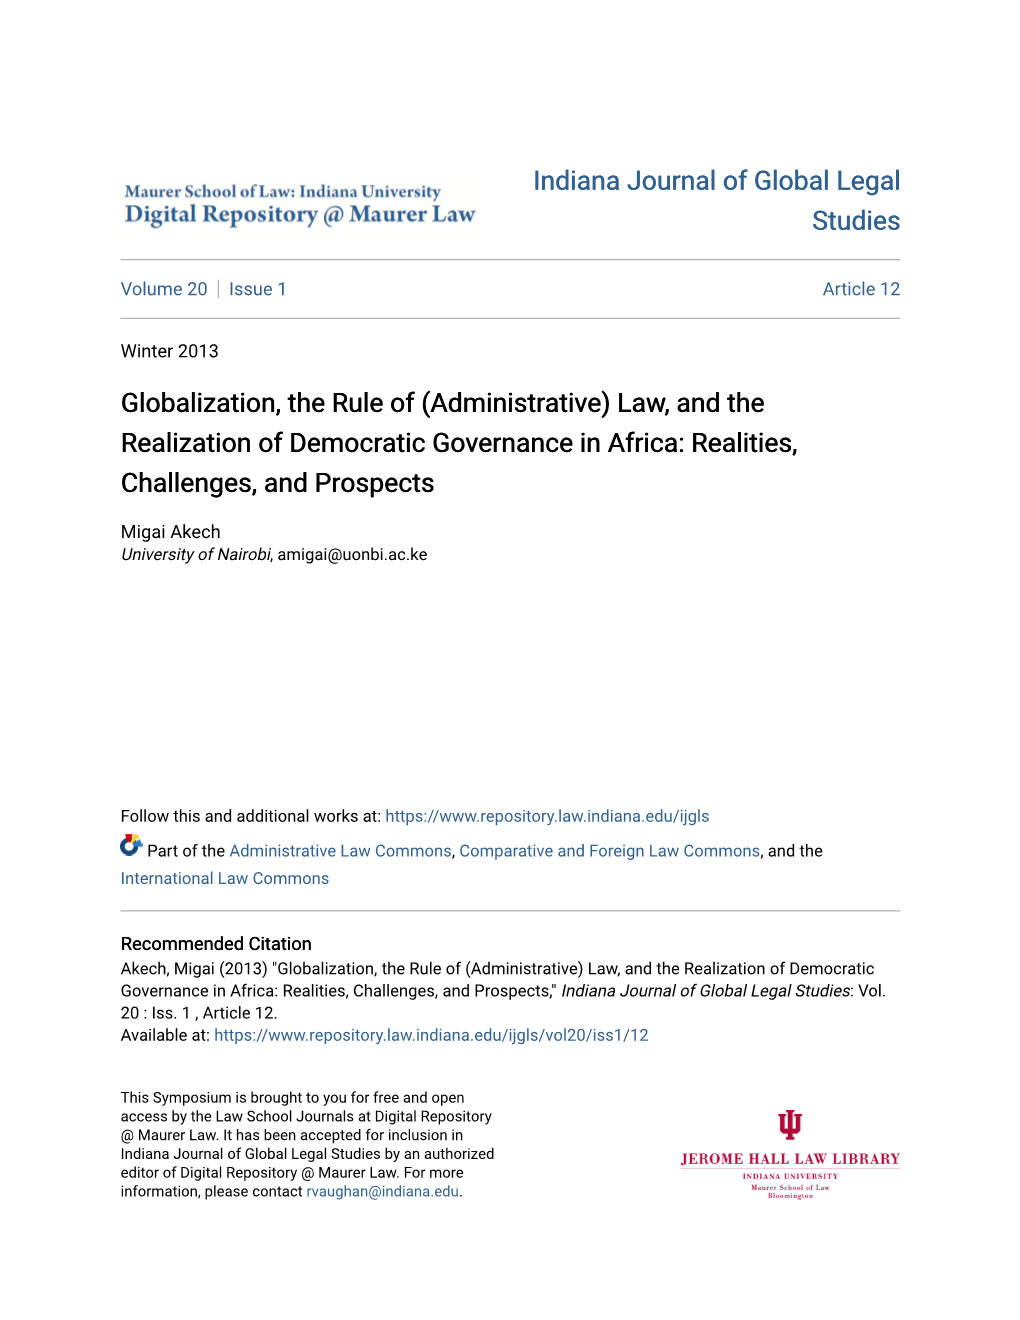 (Administrative) Law, and the Realization of Democratic Governance in Africa: Realities, Challenges, and Prospects